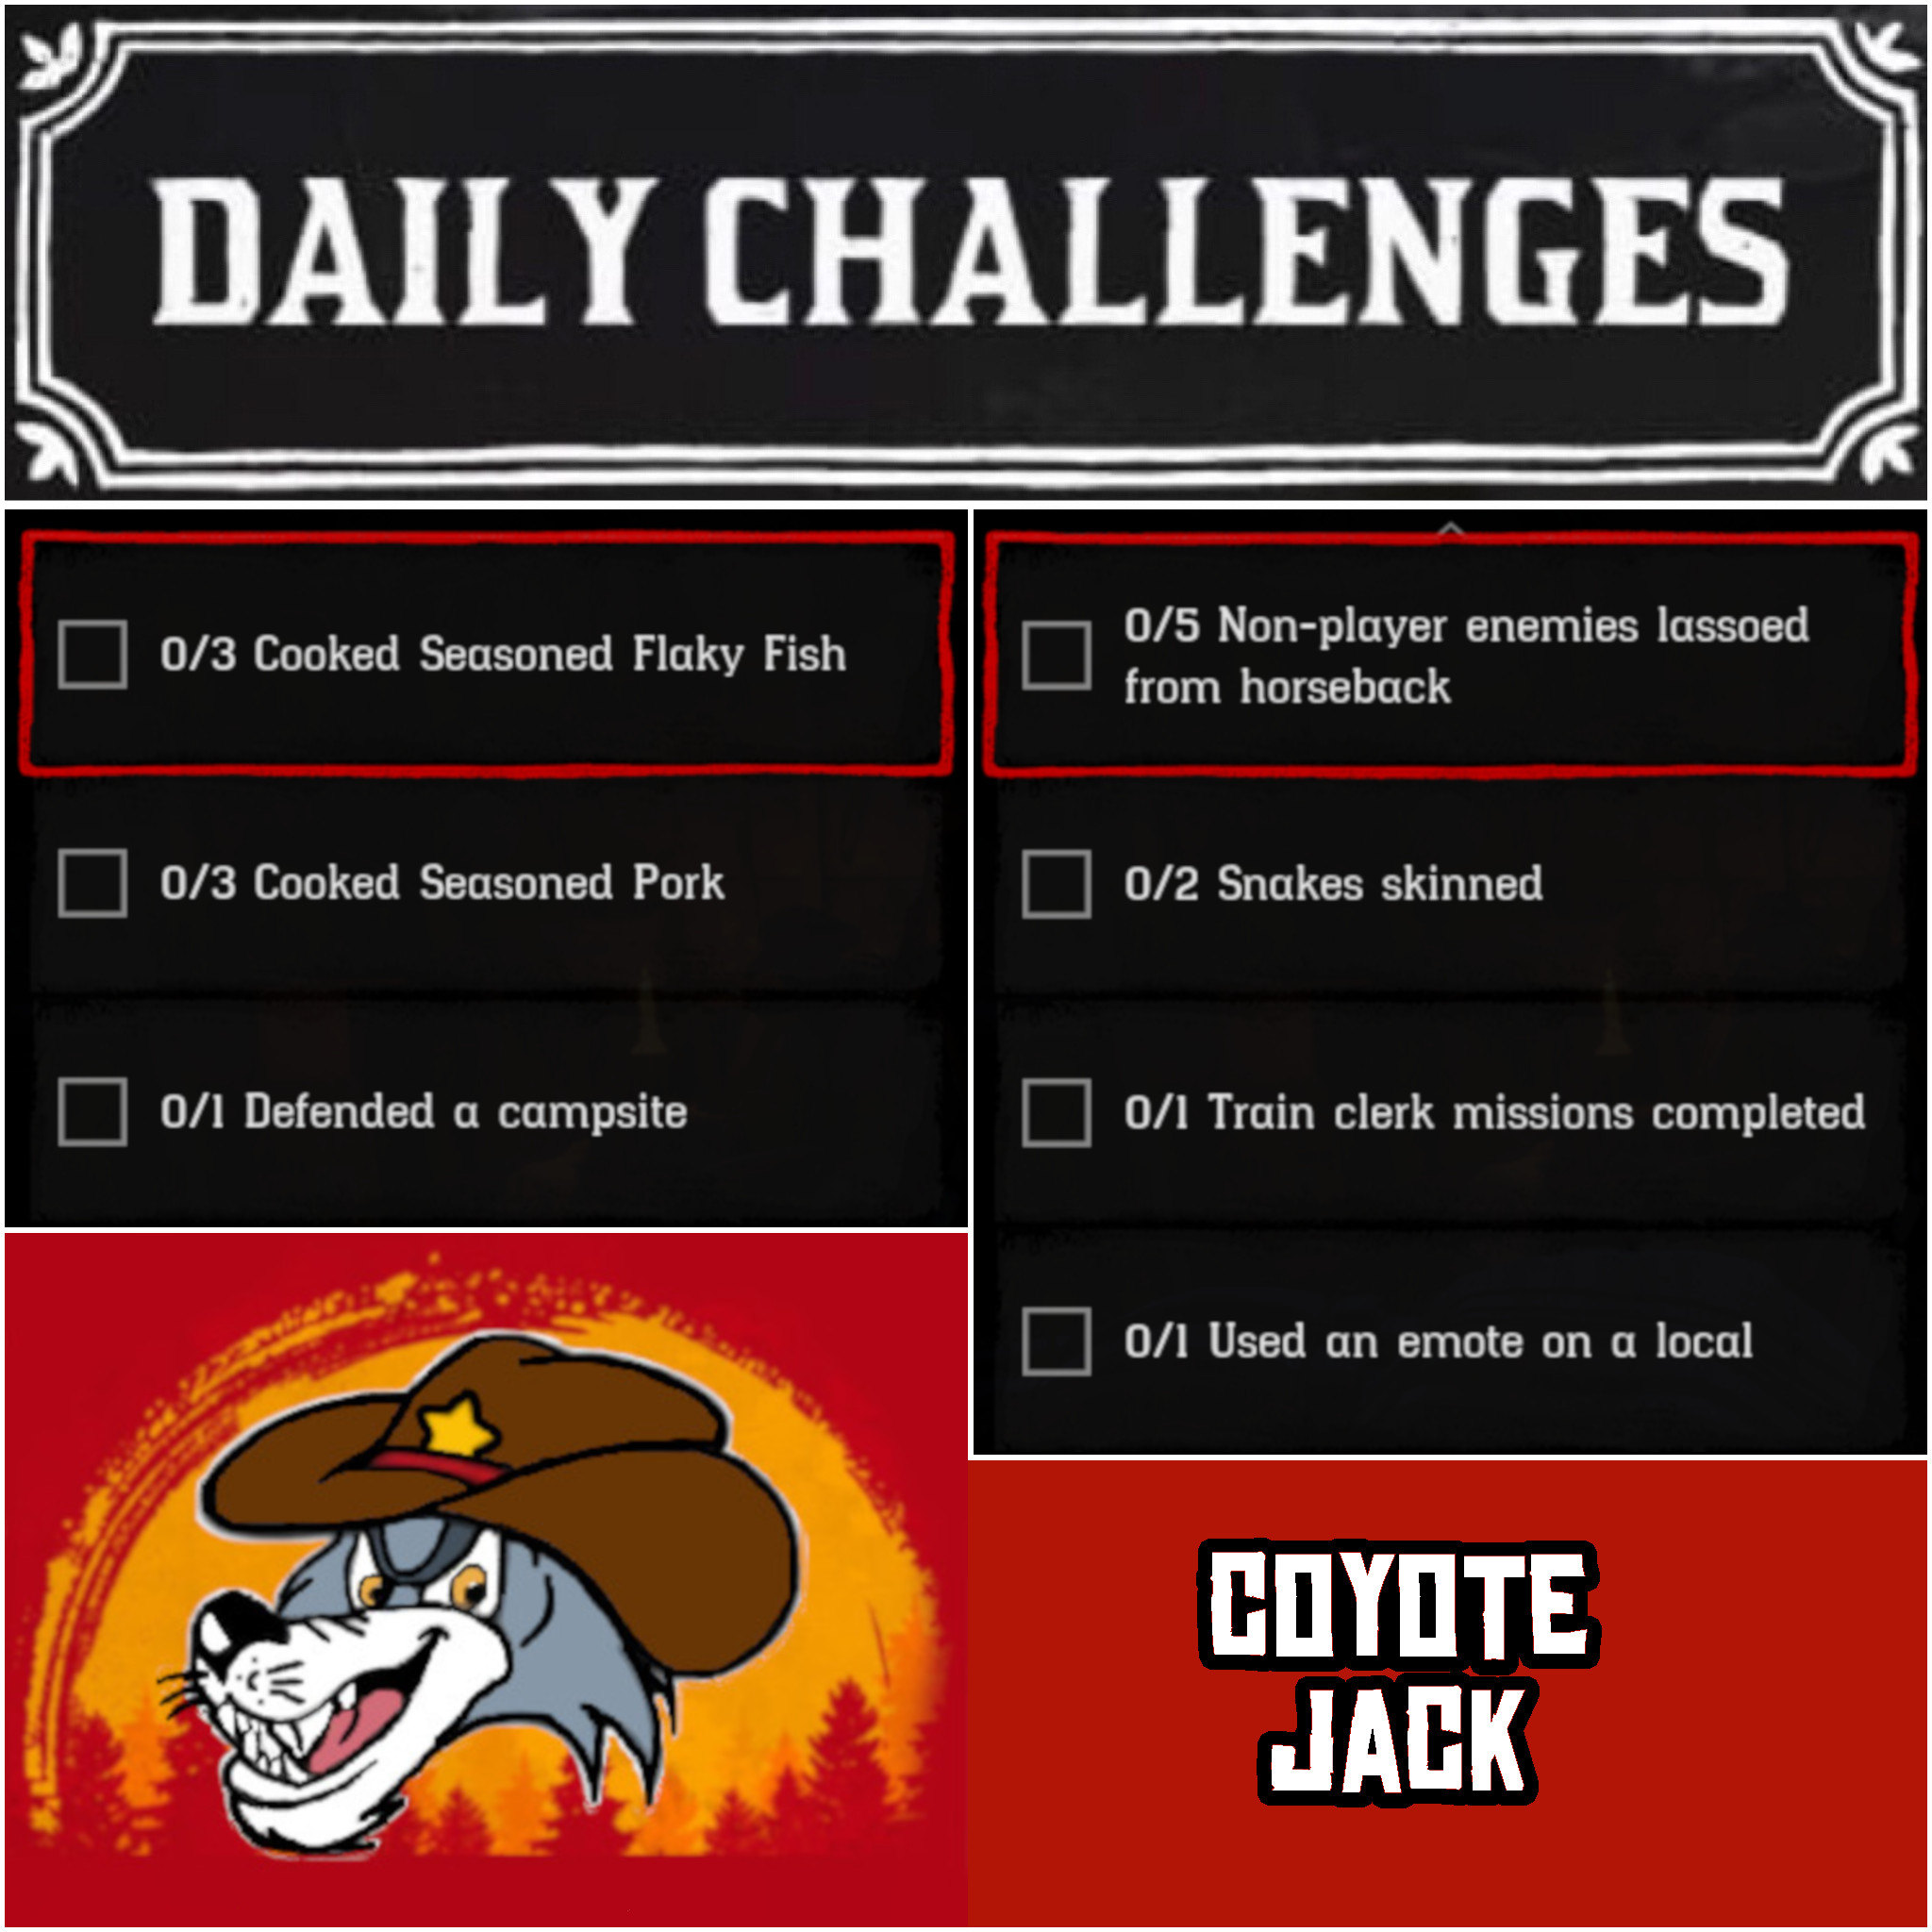 You are currently viewing Saturday 16 January Daily Challenges